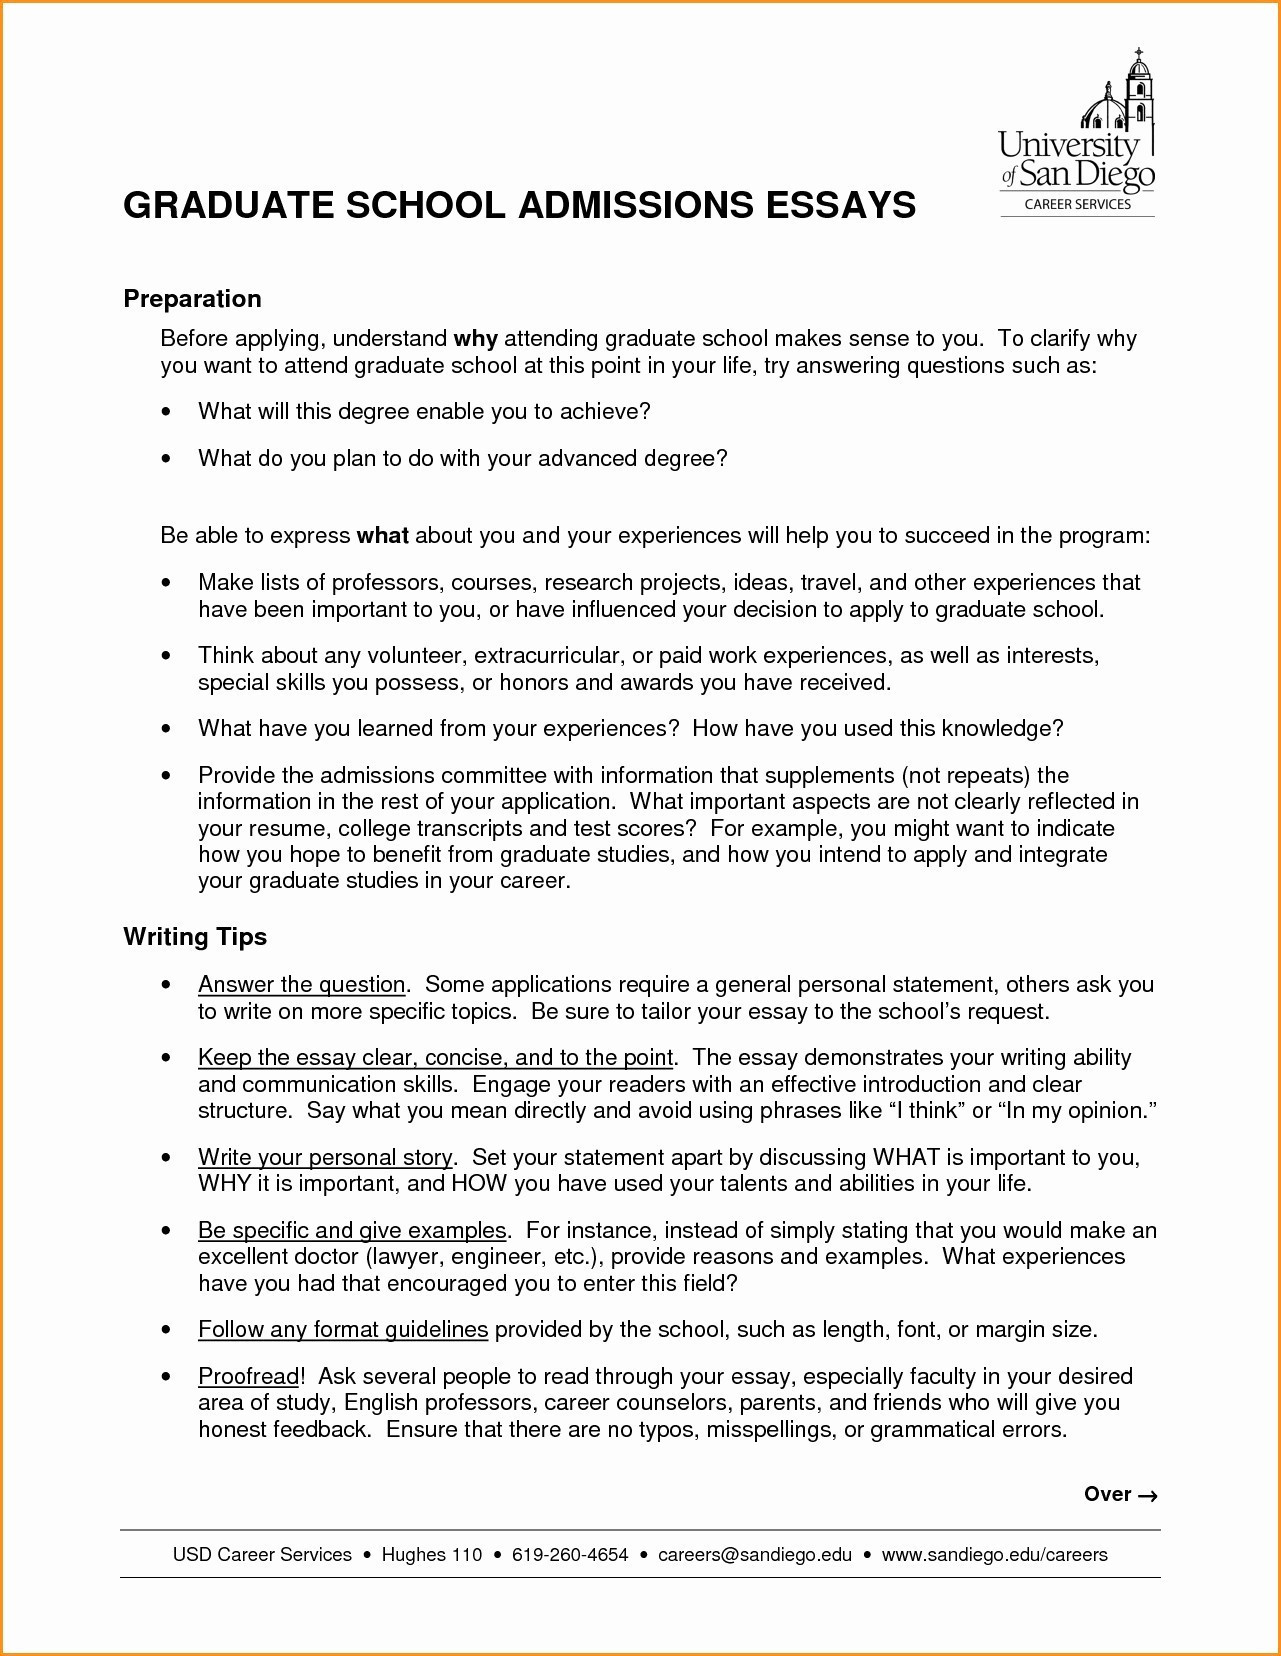 School Recommendation Letter Template - Literarywondrous Grad School Re Mendation Letter Sample